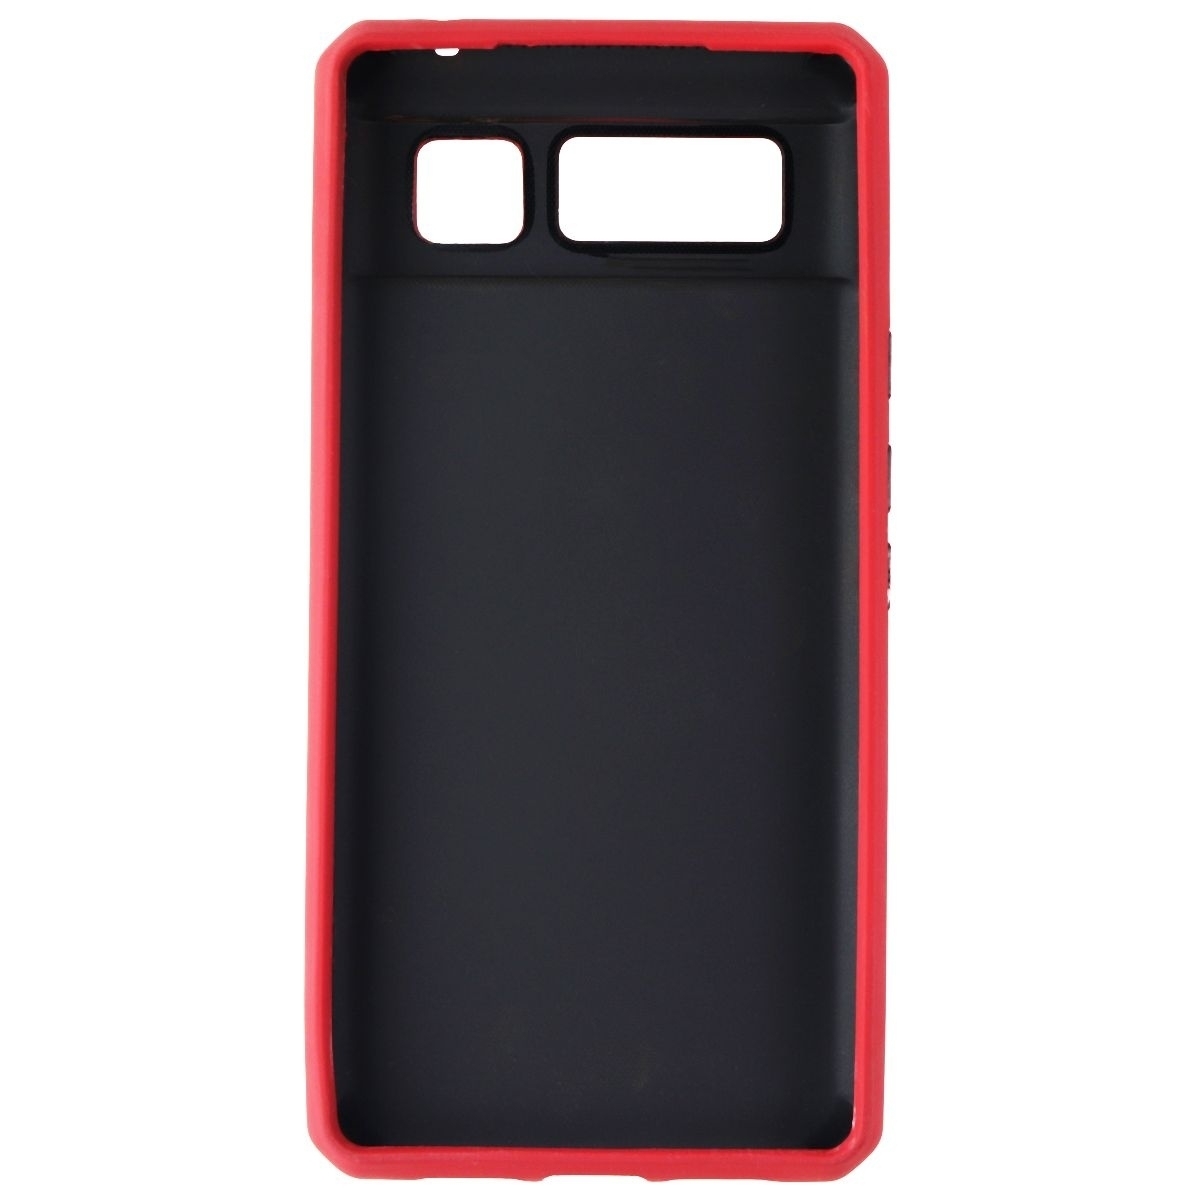 ITSKINS Spectrum Silk Protective Phone Case For Google Pixel 6 - Chili Red